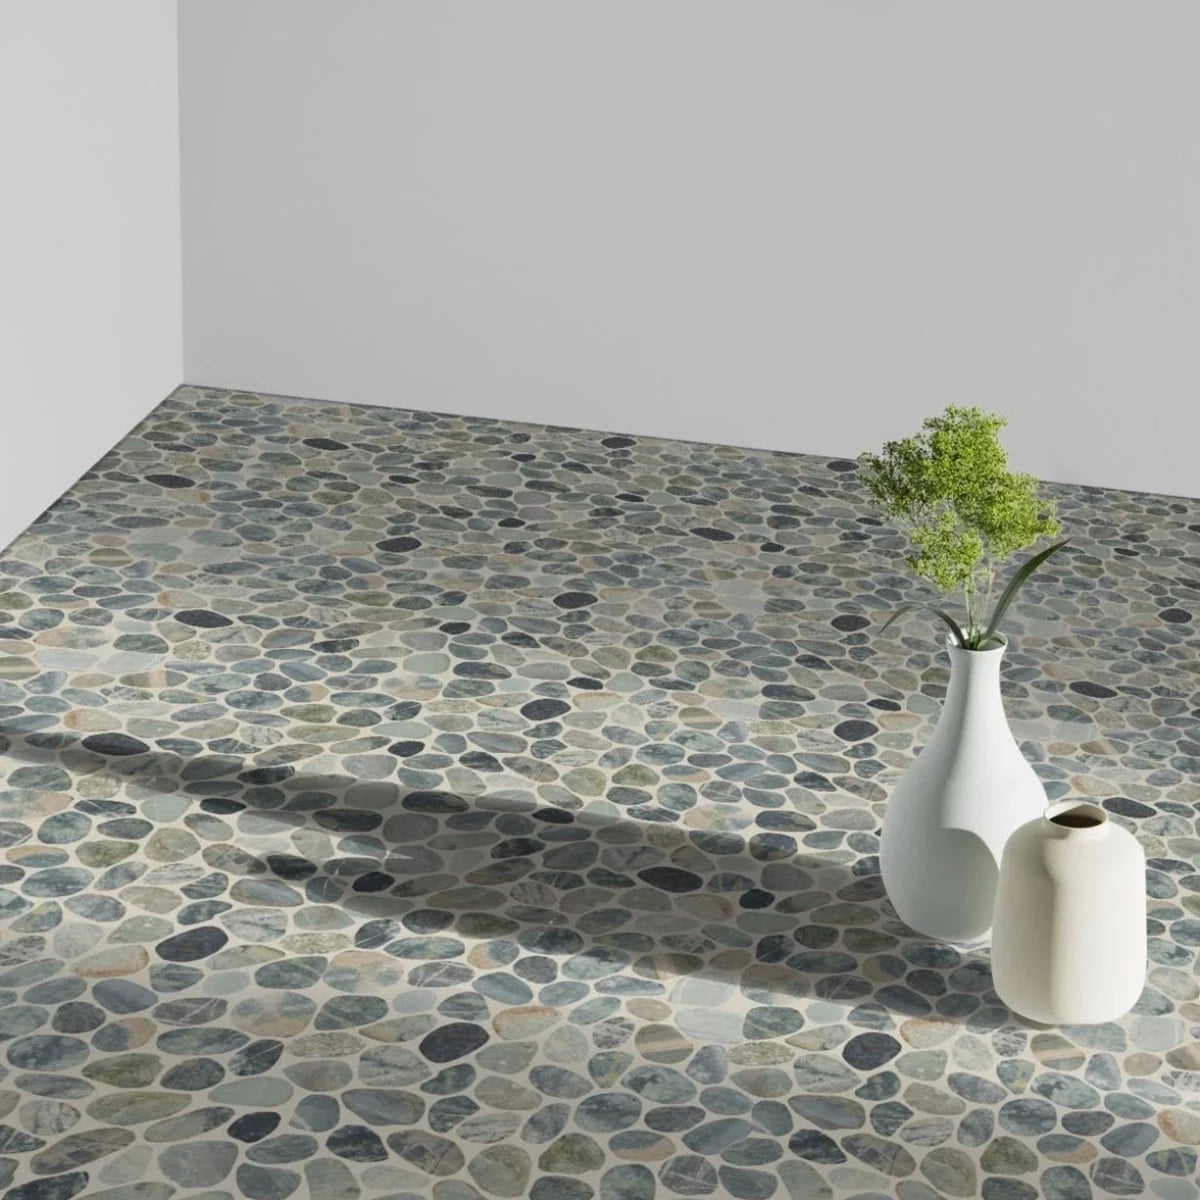 Teal Blue Sliced Pebble tile flooring with two small white vases sitting on top